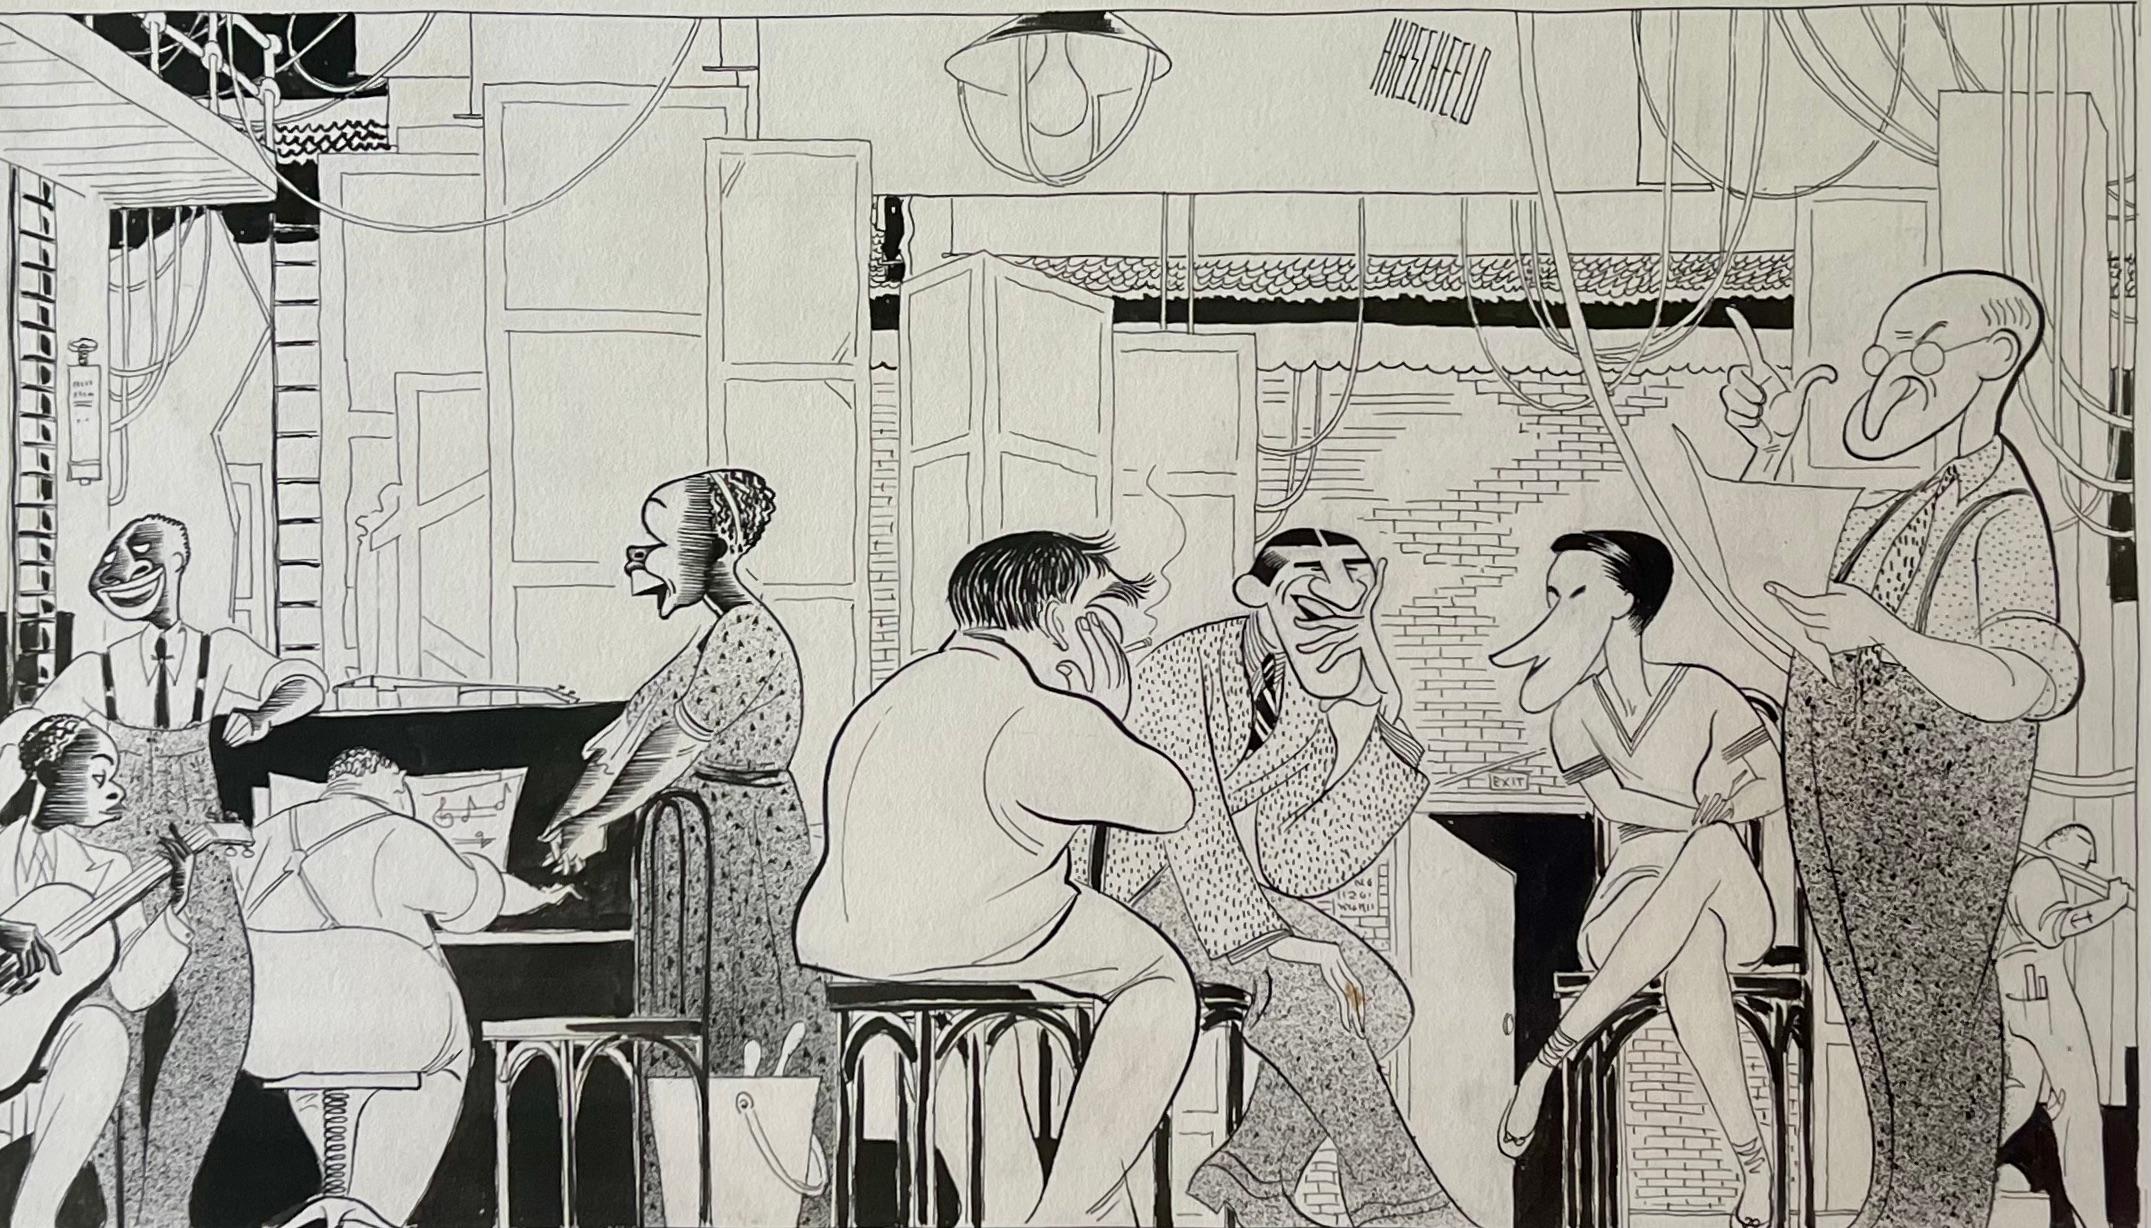 Albert Al Hirschfeld Interior Art – "At Home Abroad" 1935 Broadway Play NY Times Published Illustration 20th Century